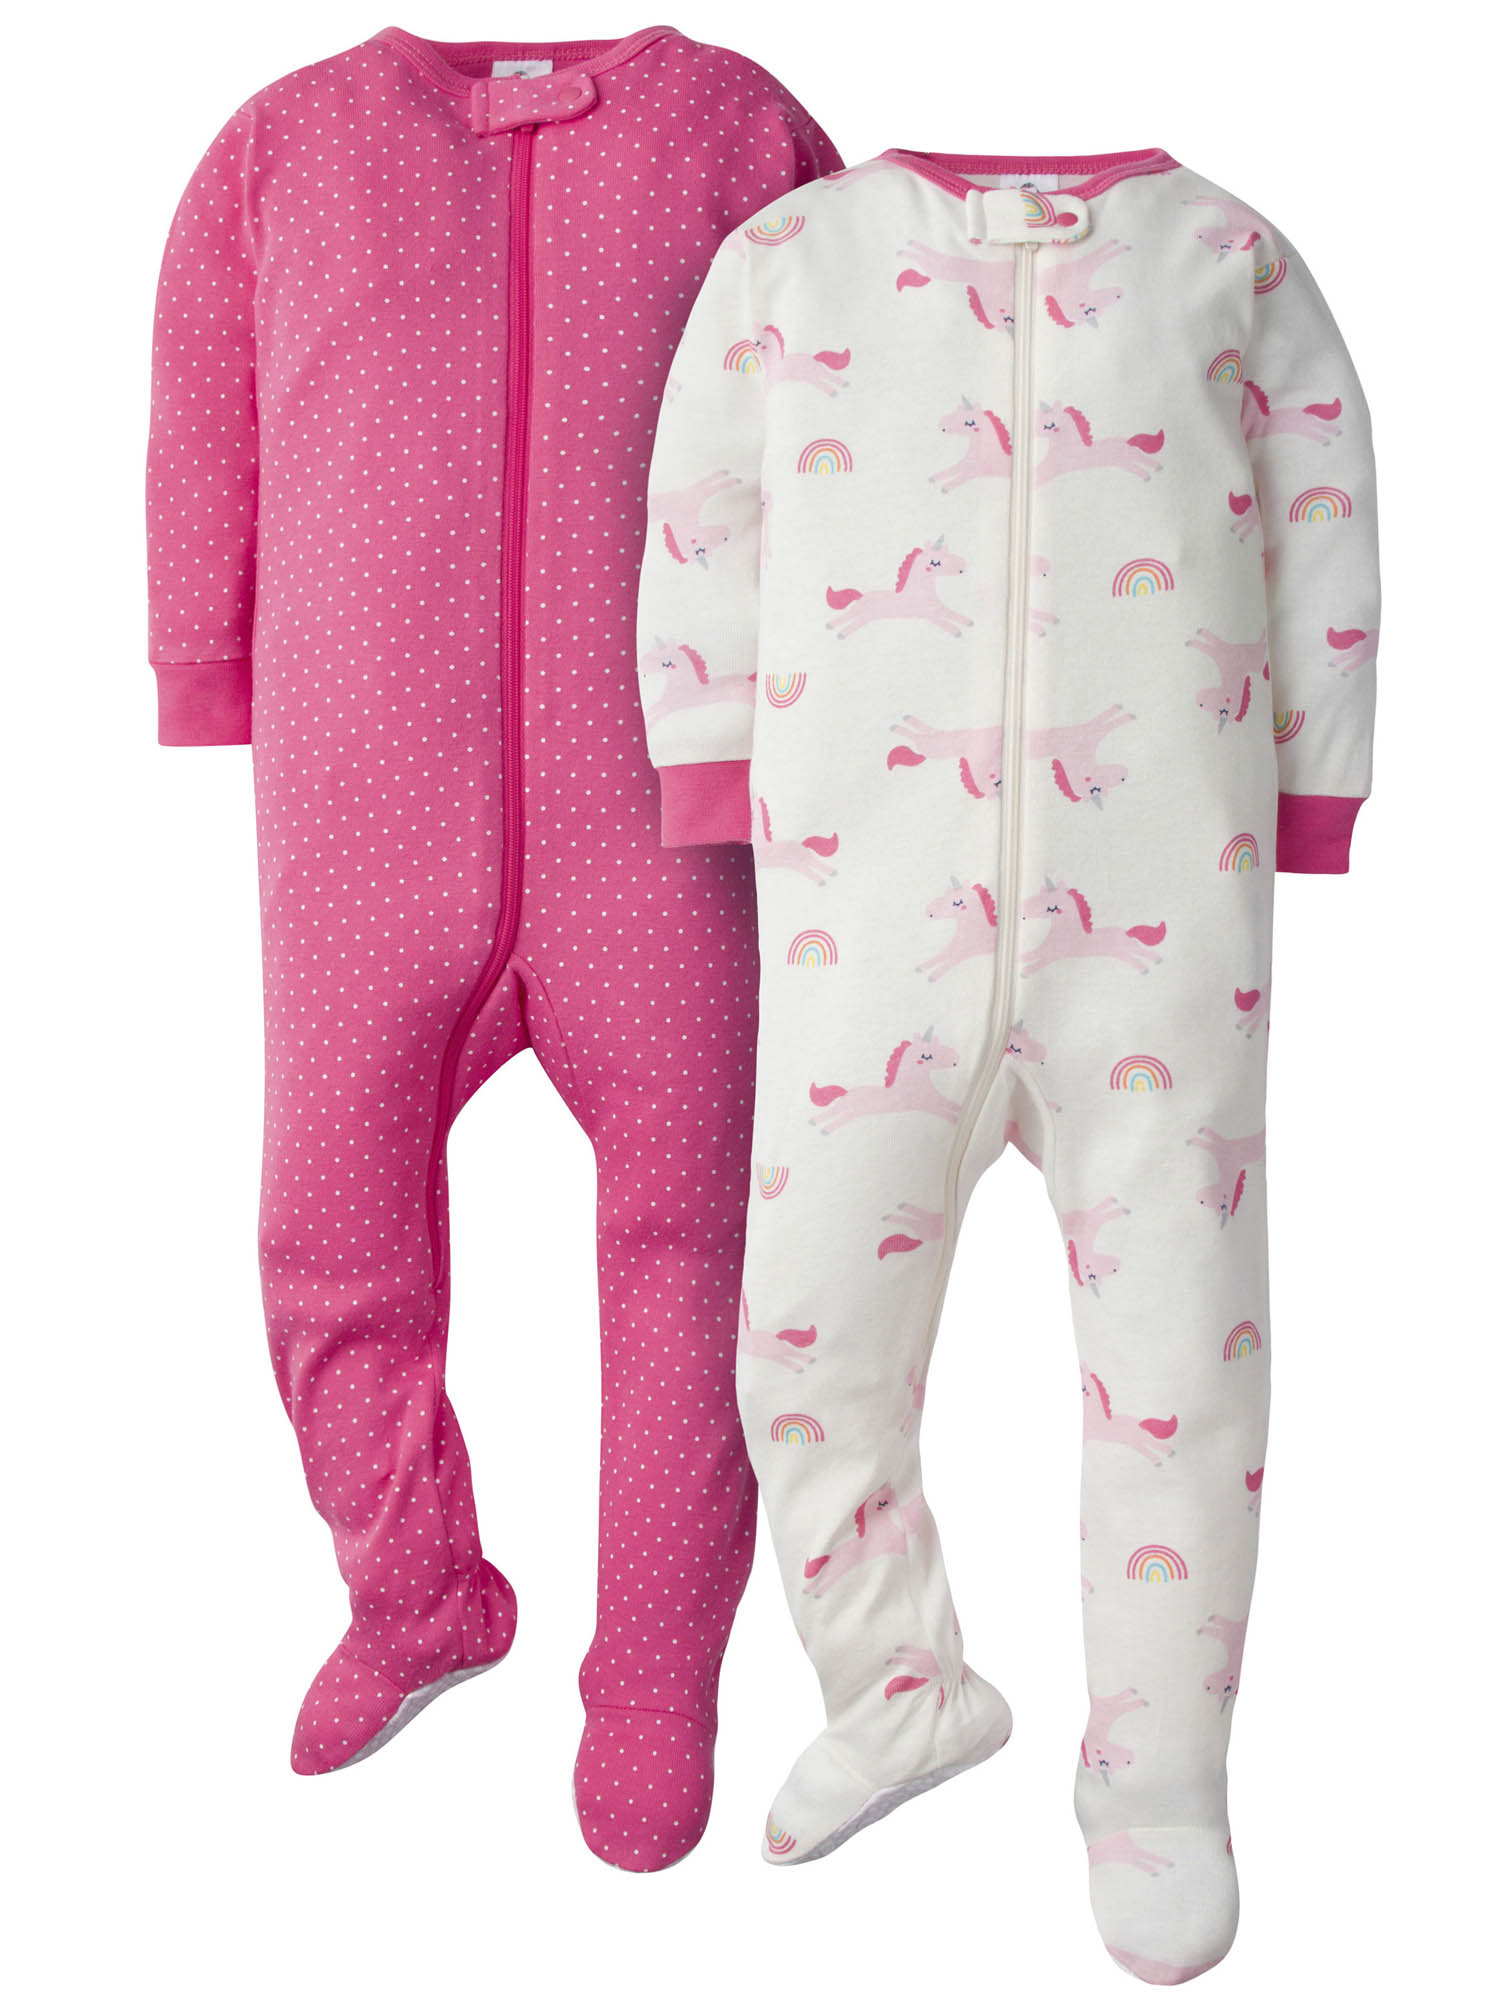 Gerber Baby-Girls 2-Pack Footed Unionsuit Sleepers